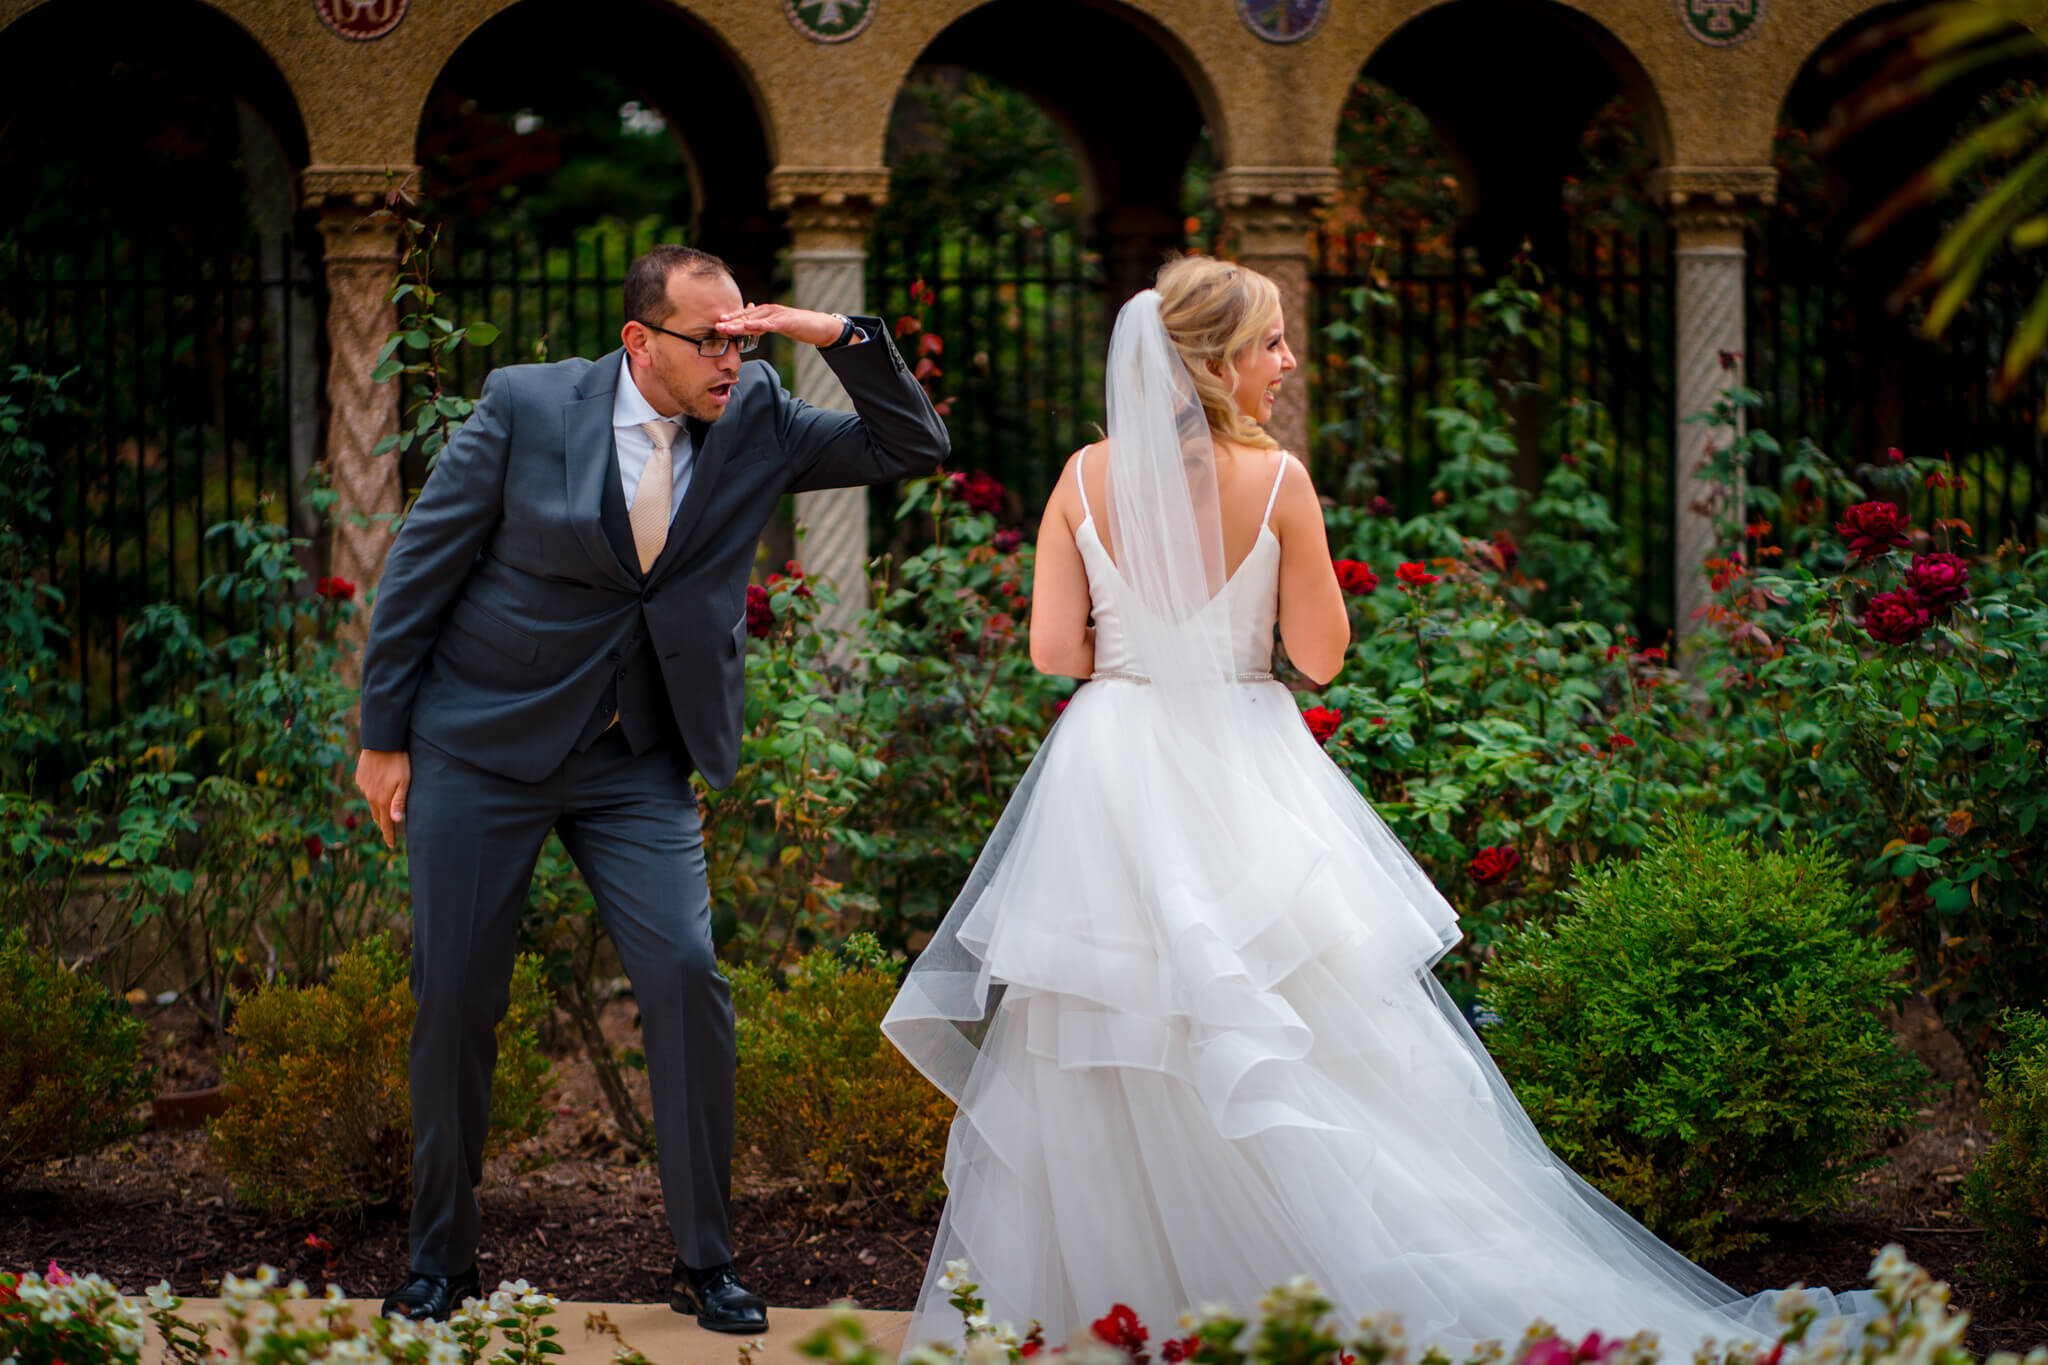 01-Washington-DC-Mini-Wedding-St-Francis-Hall-Franciscan-Monastery-First-Look-Photography-by-Bee-Two-Sweet-31.jpg